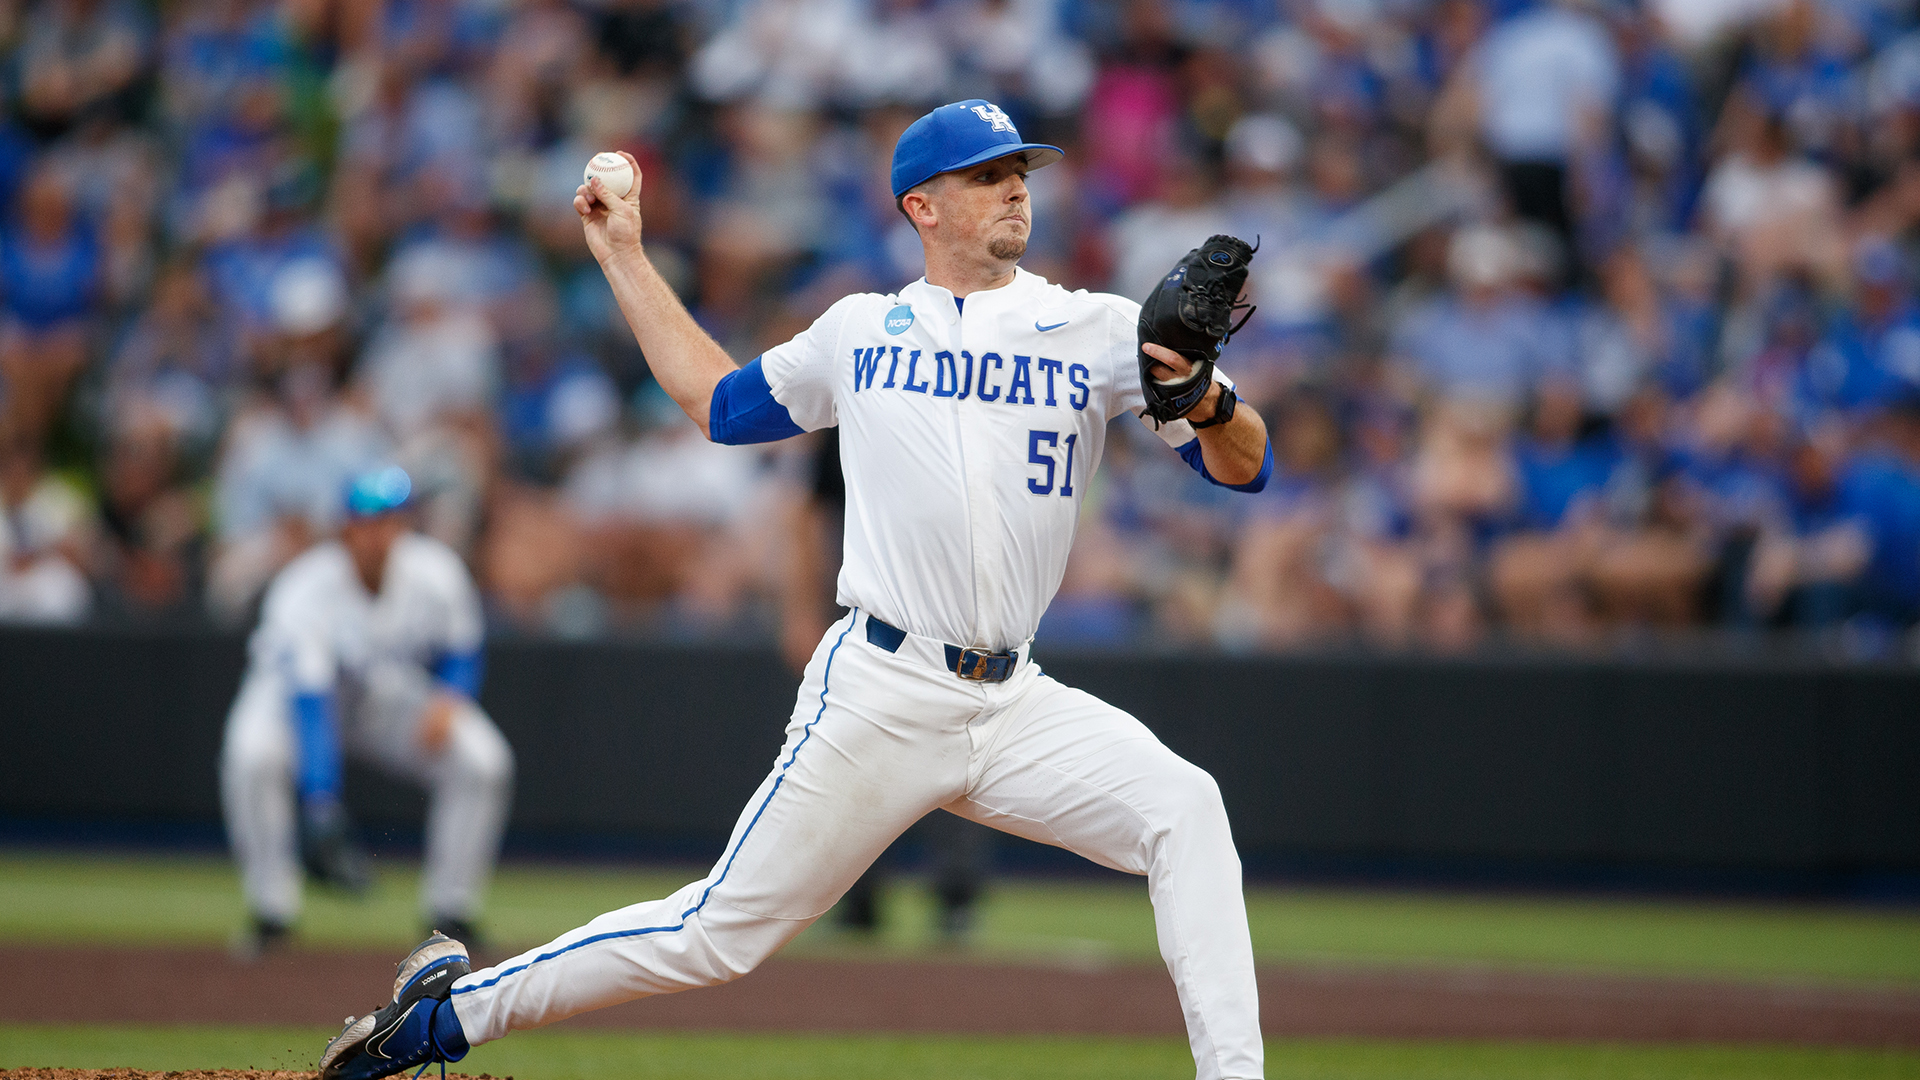 Pooser's Pitching Performance Lifts Cats on Saturday